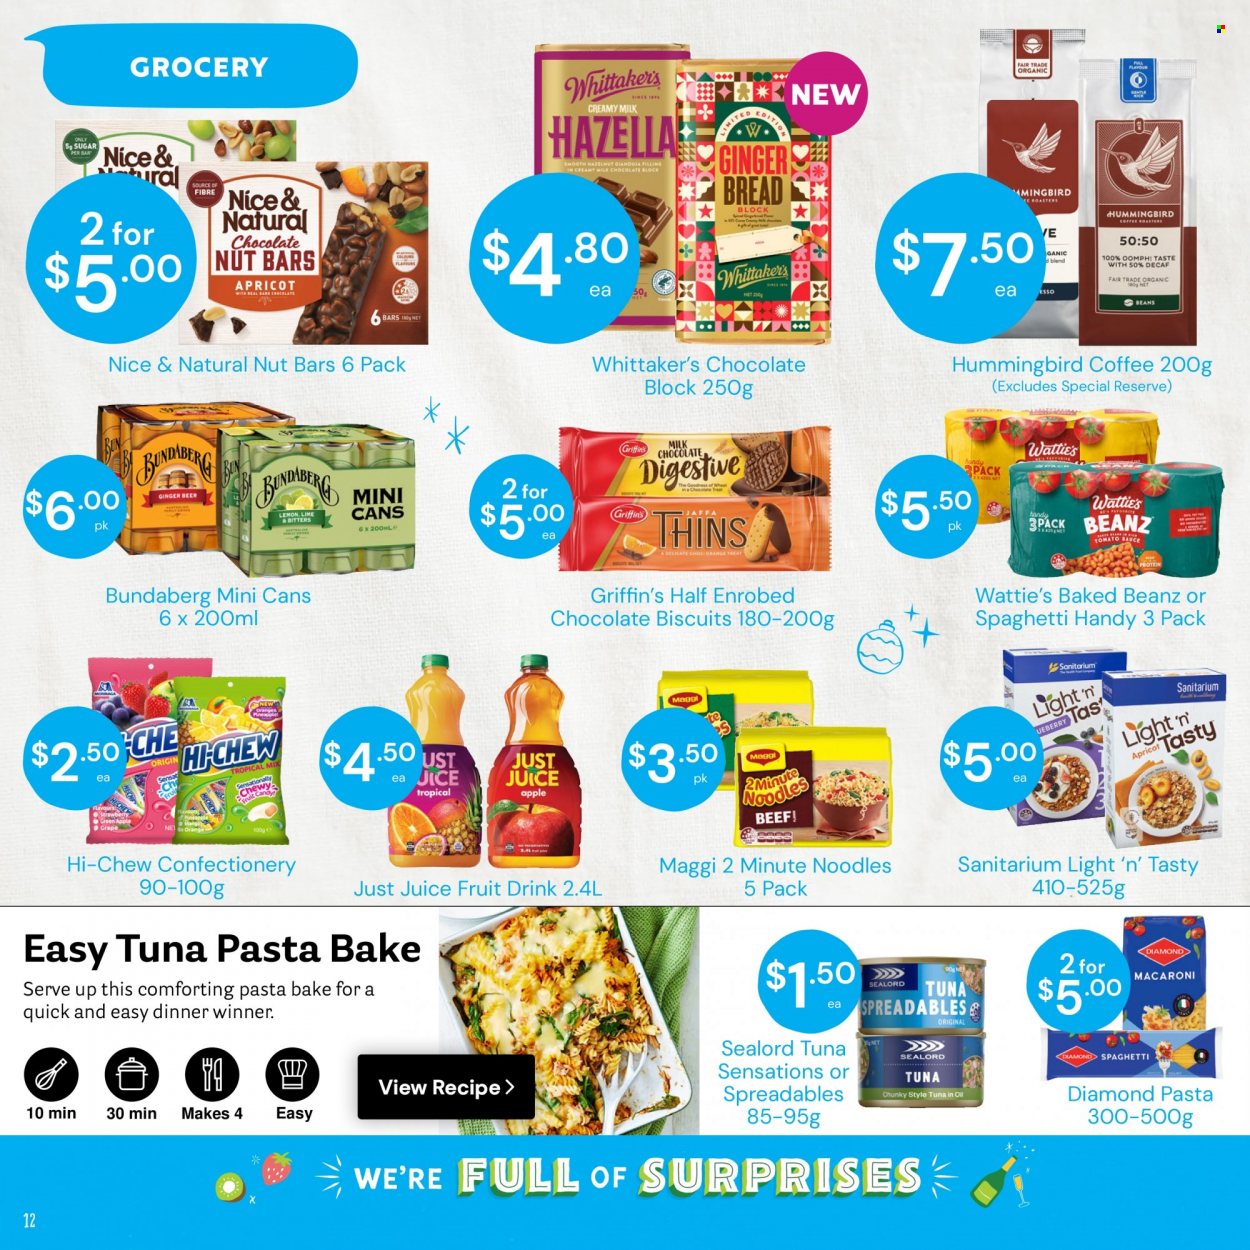 thumbnail - Fresh Choice mailer - 28.11.2022 - 04.12.2022 - Sales products - bread, oranges, tuna, Sealord, macaroni, sauce, noodles, Wattie's, milk chocolate, chocolate, biscuit, Griffin's, Whittaker's, Digestive, sugar, Maggi, tomato sauce, sealord tuna, nut bar, juice, fruit drink, Bundaberg, coffee, beer, ginger beer. Page 12.